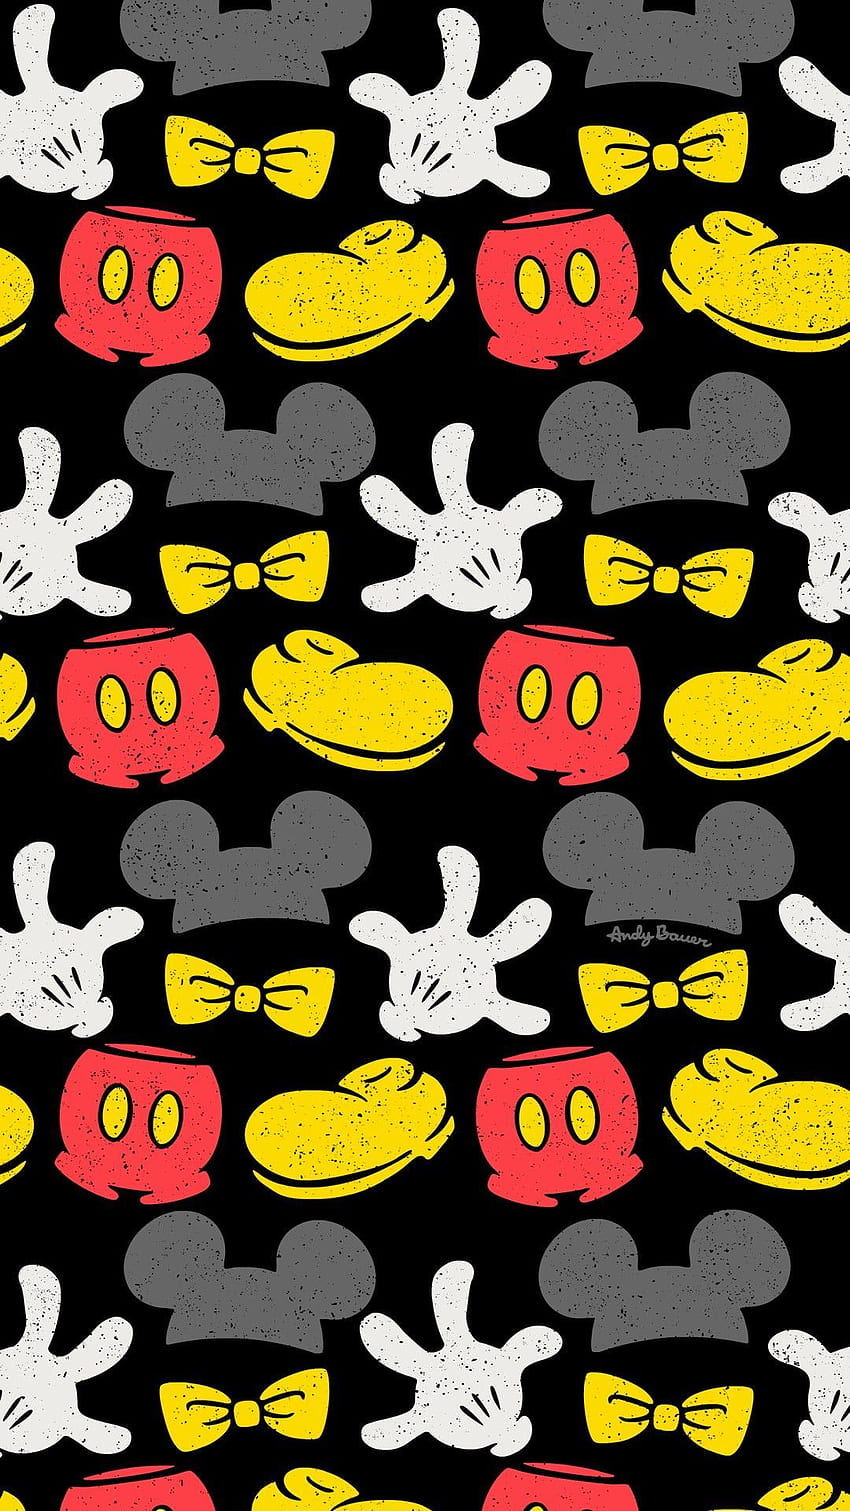 Mickey Mouse repeat pattern surface design Disney art illustration drawing phone iconic. Disney art, Repeating patterns, Phone background patterns HD phone wallpaper